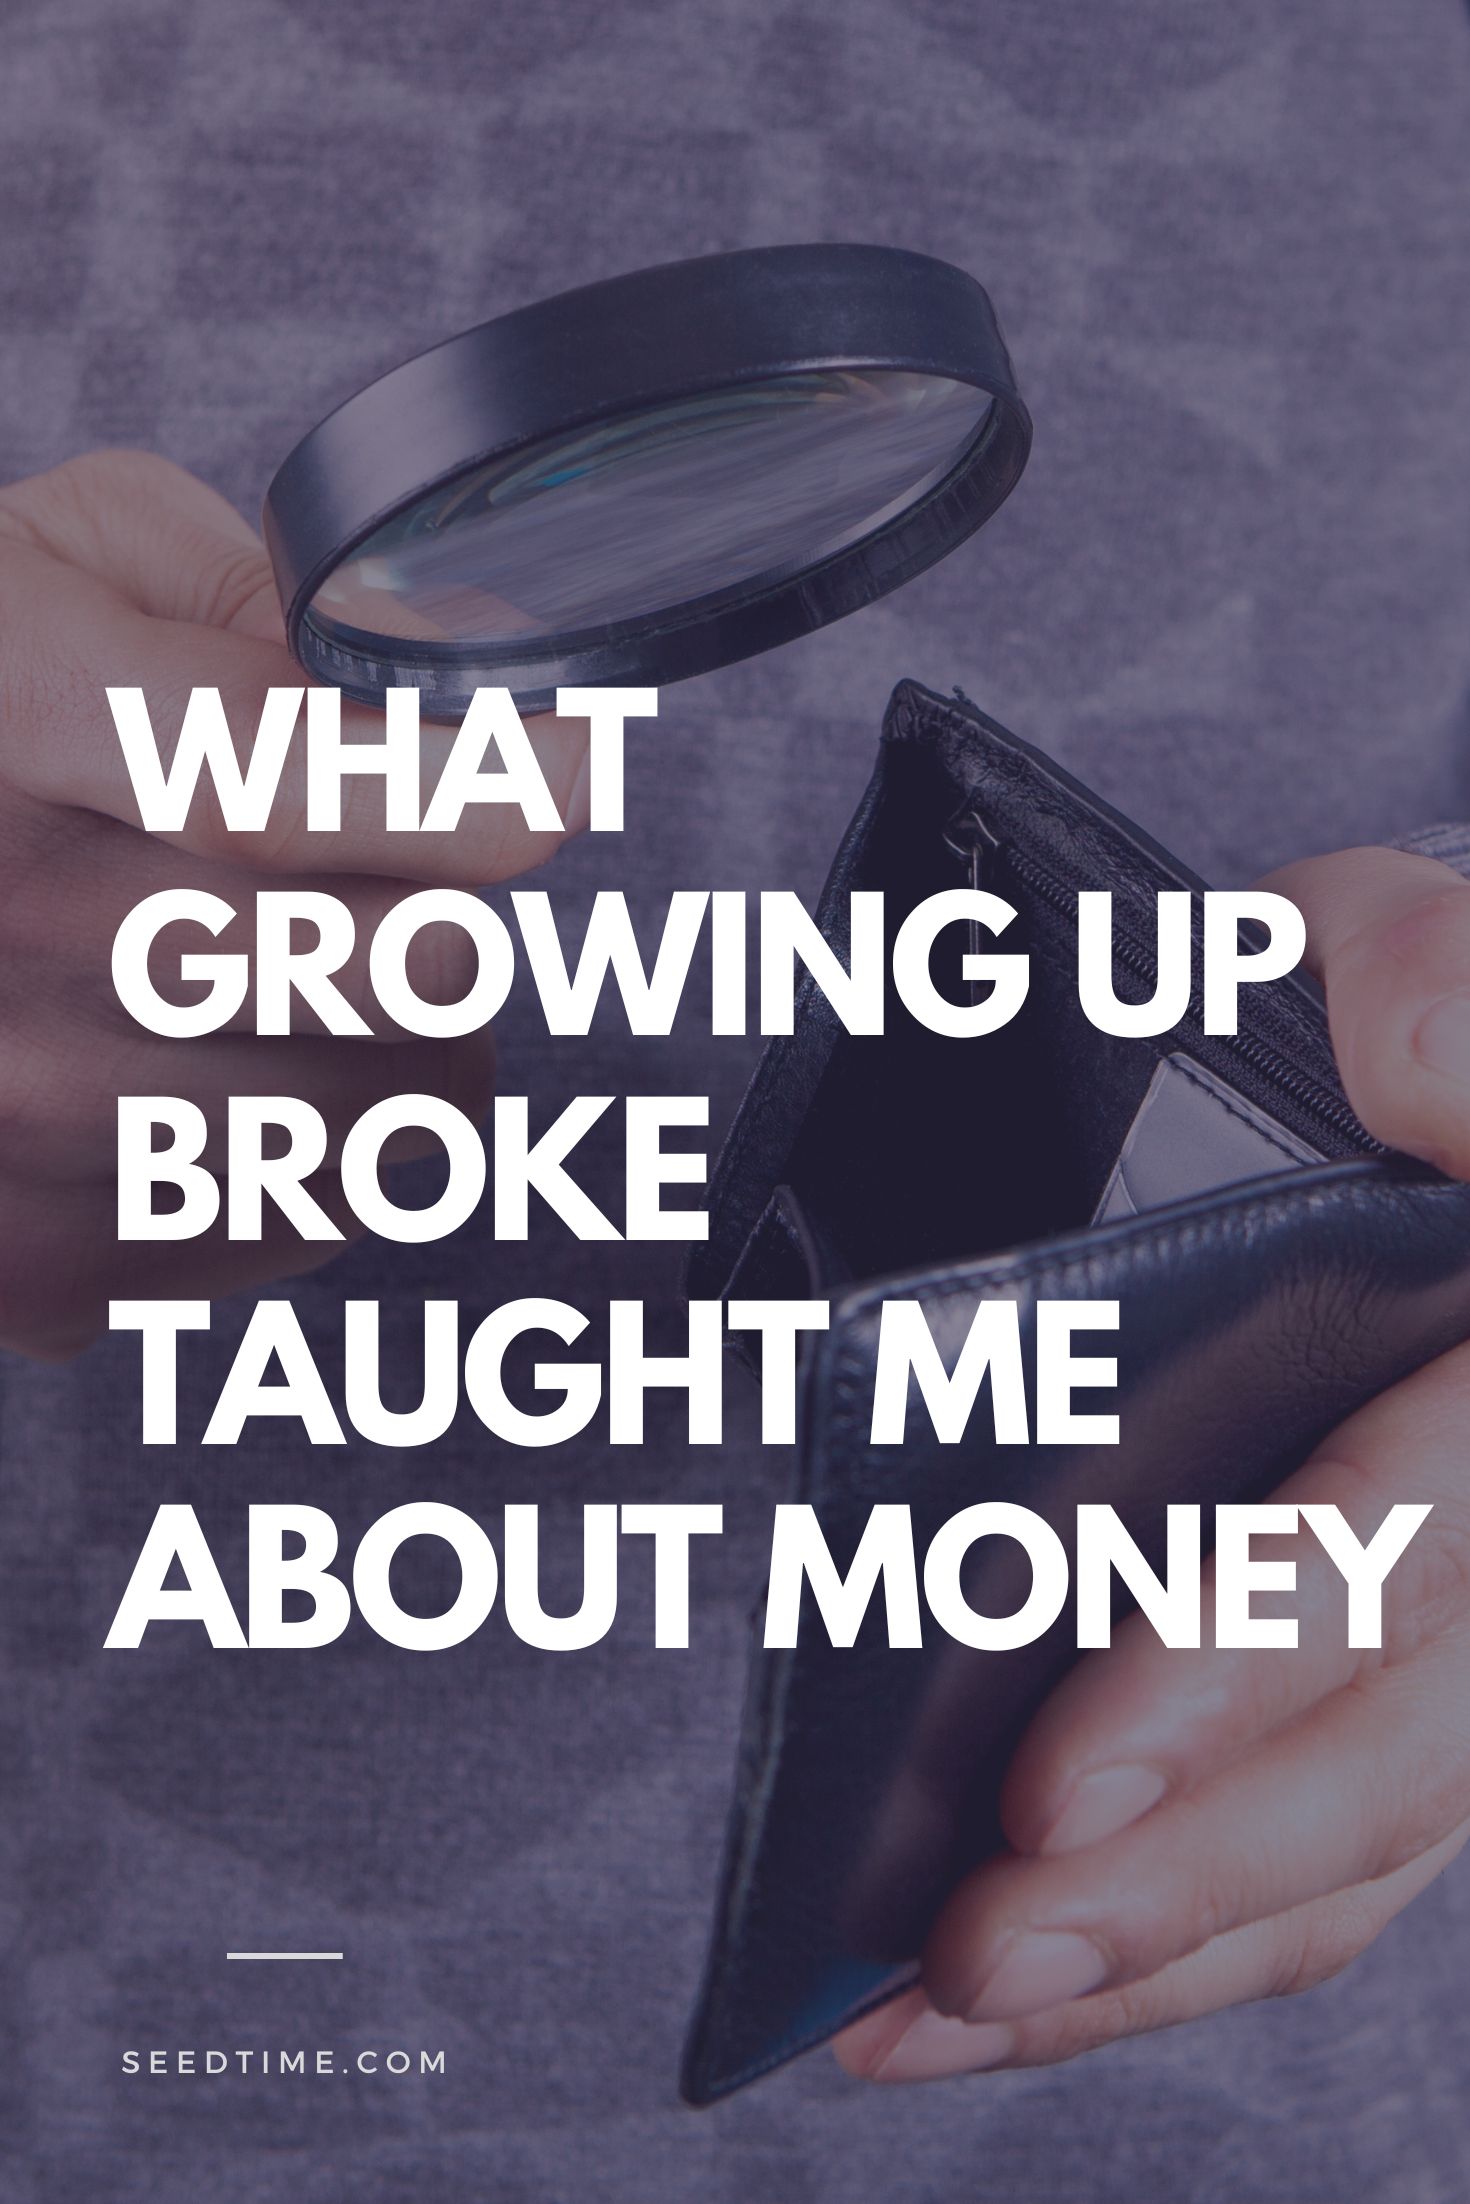 What growing up broke taught me about money